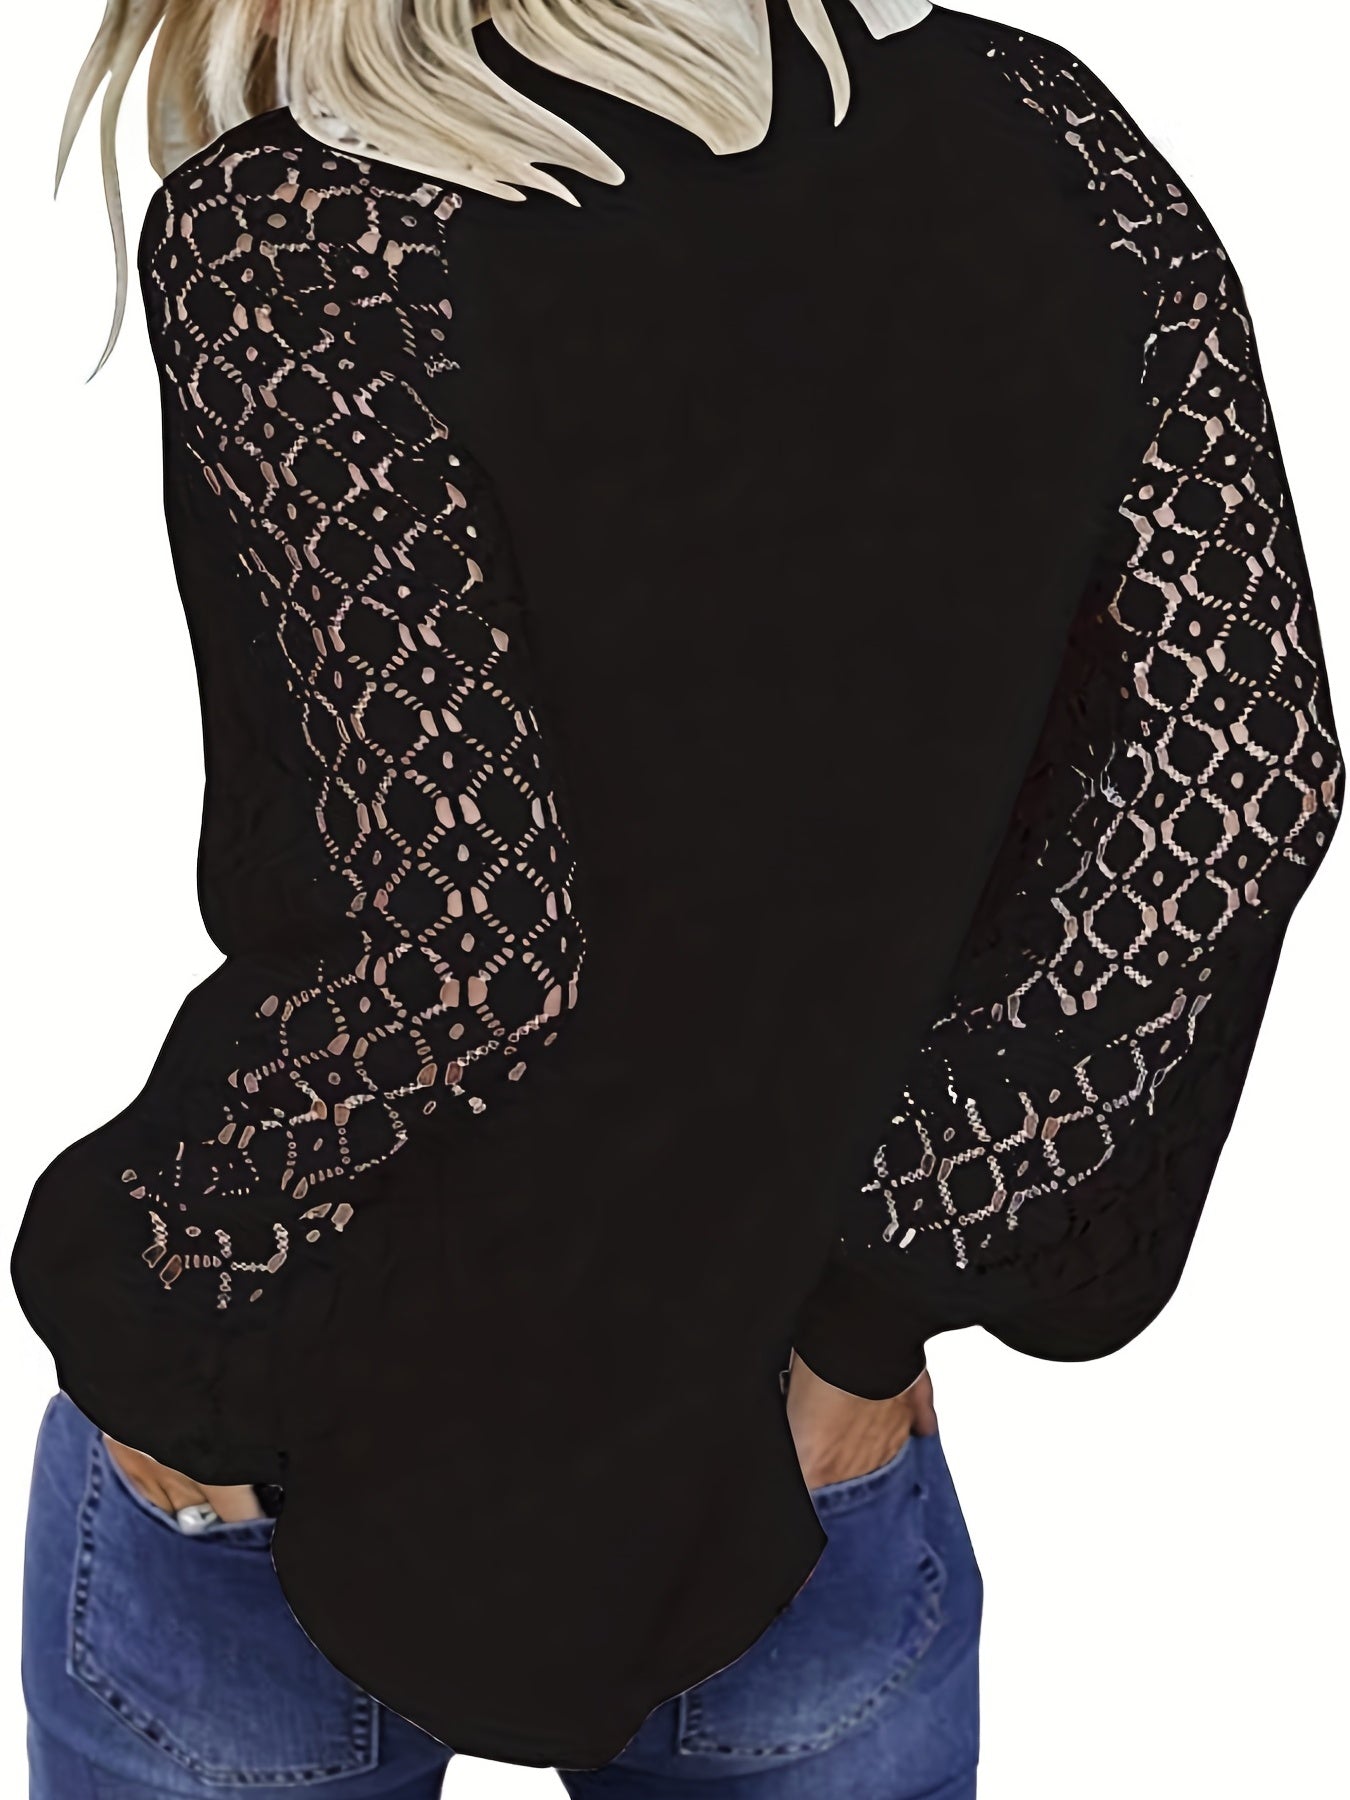 Vzyzv Contrast Lace Crew Neck T-Shirt, Casual Long Sleeve Top For Spring & Fall, Women's Clothing